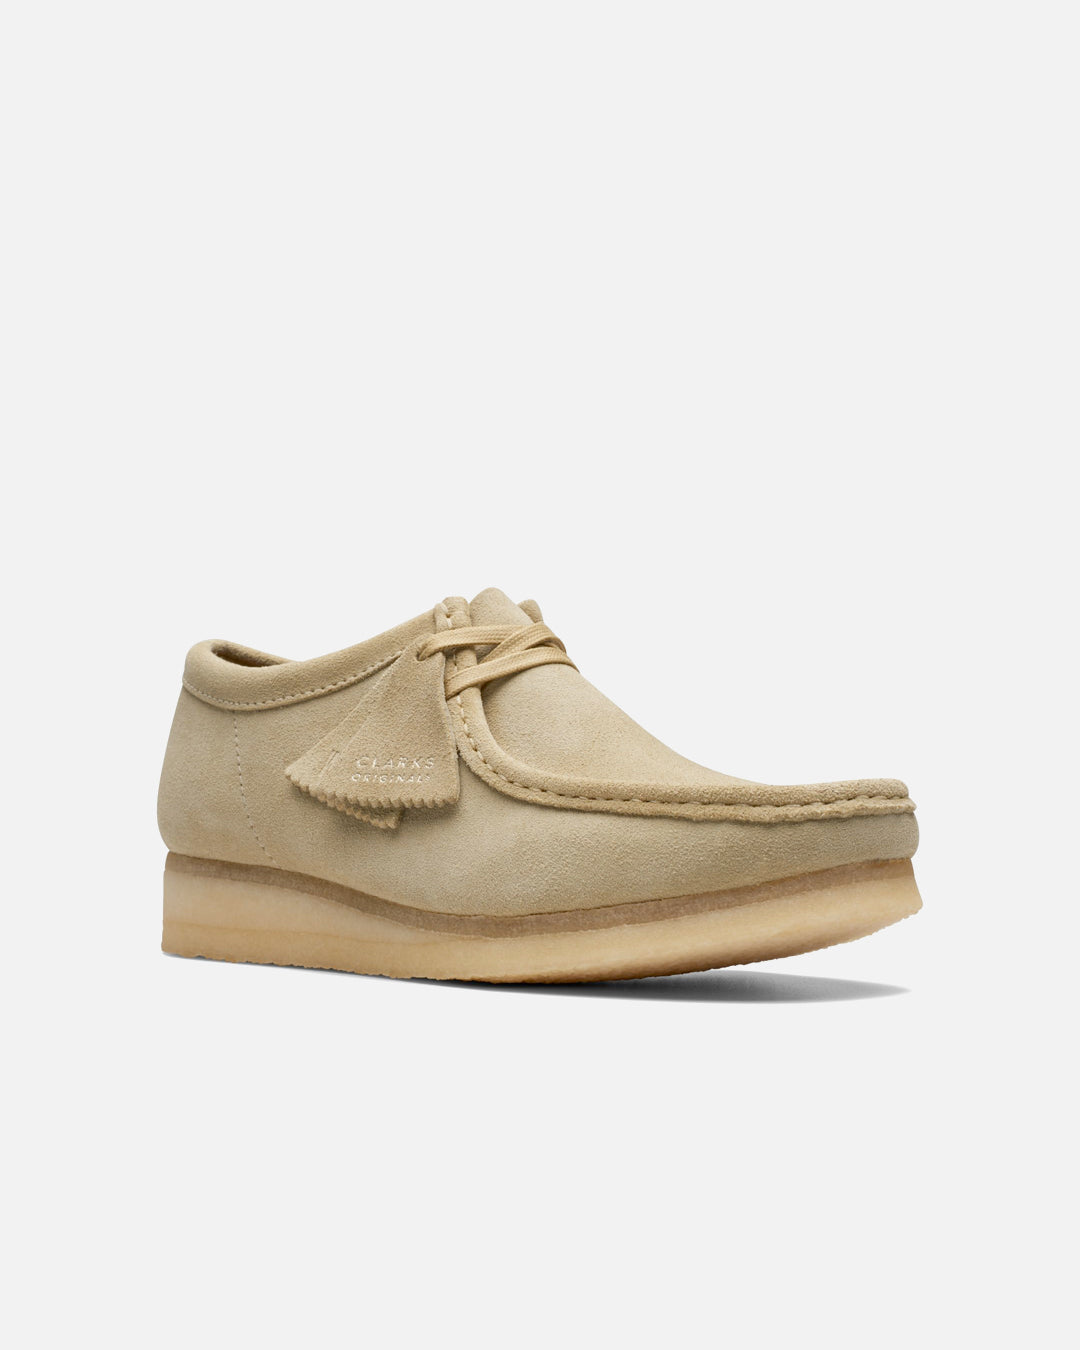 Lima couscous Canberra Clarks Originals Wallabee in Maple Suede | Blues Store